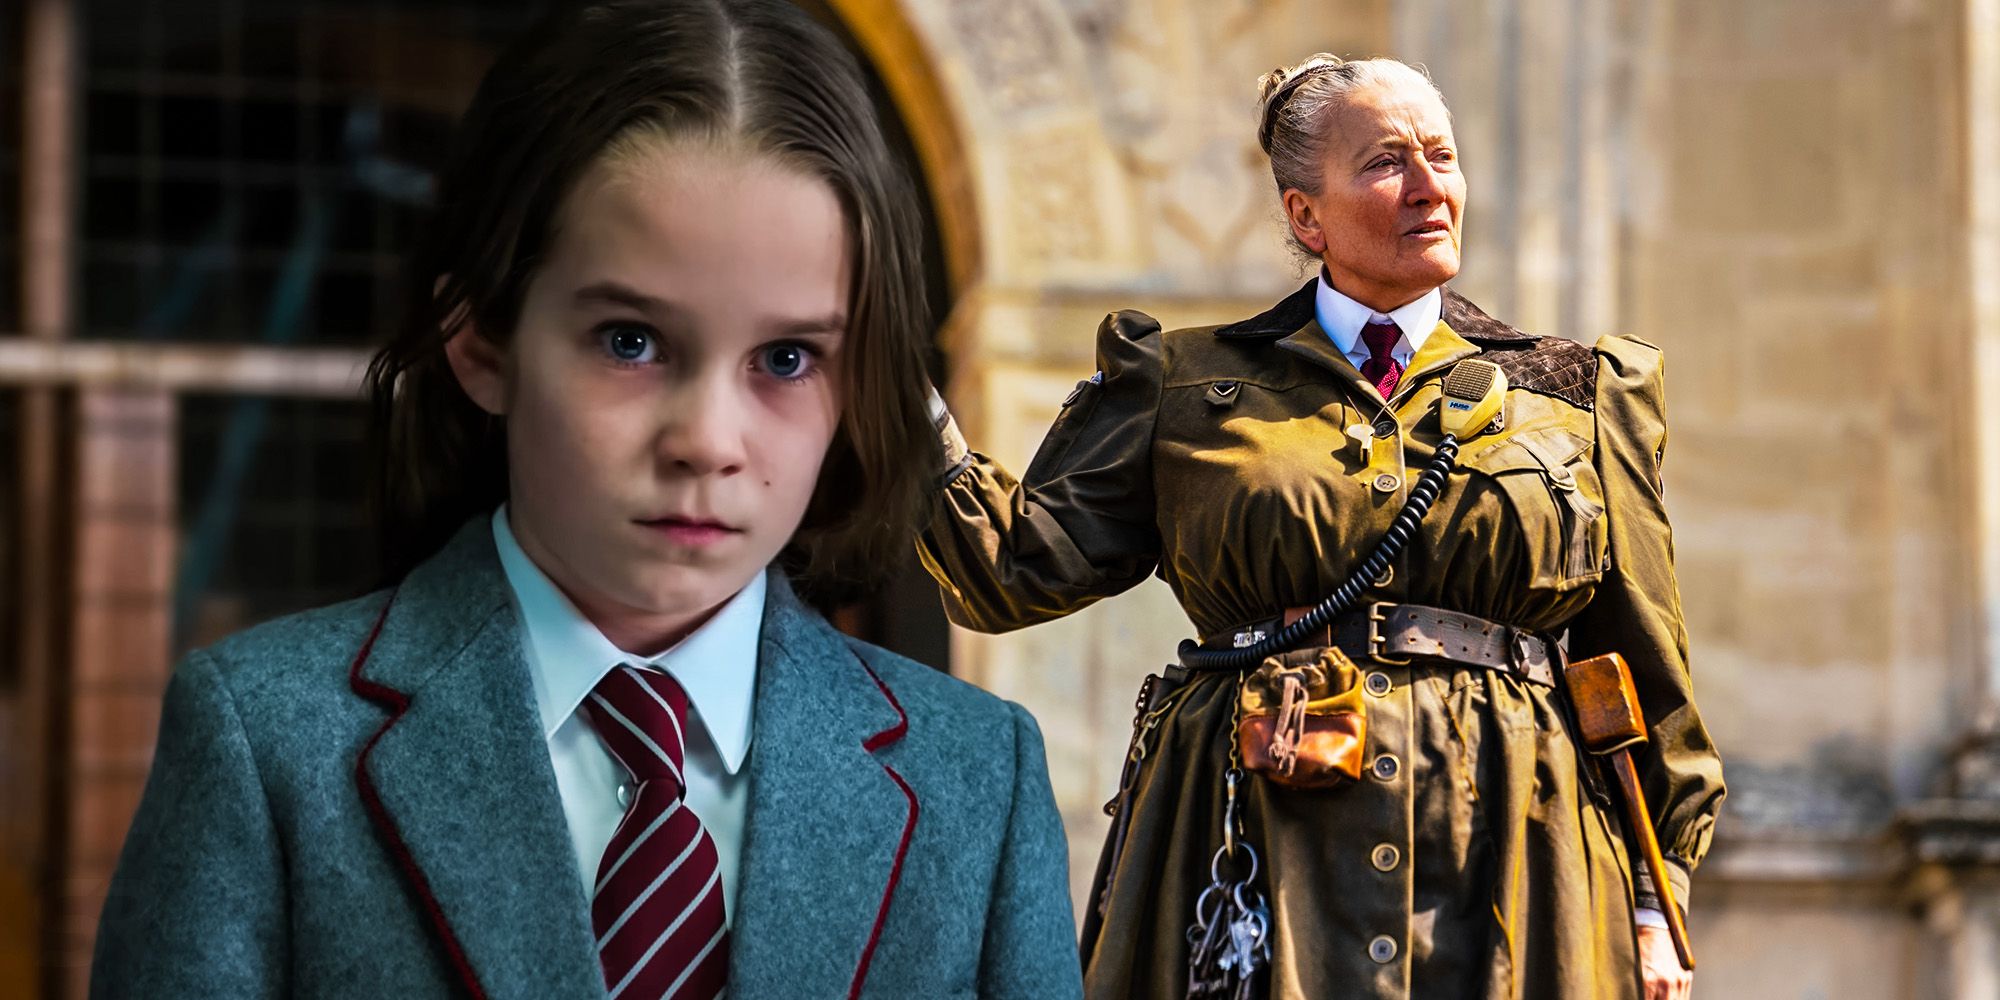 Matilda musical Repeating An Awful Trend